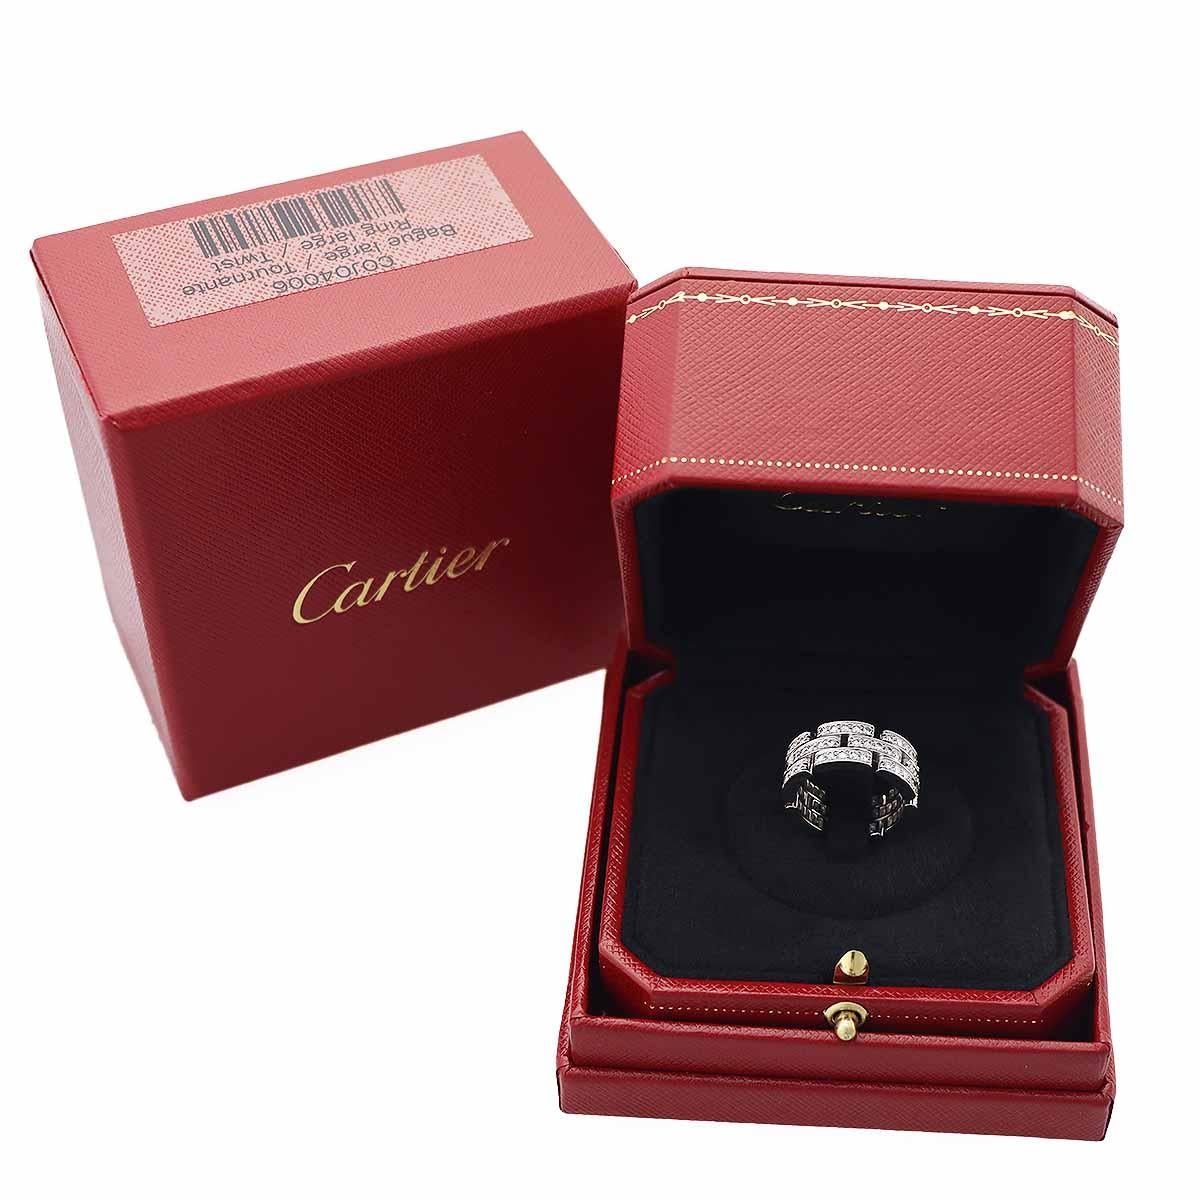 Cartier 18Karat White Gold Full Diamond Maillon Panthere 3-Row Ring US size 6 For Sale 1